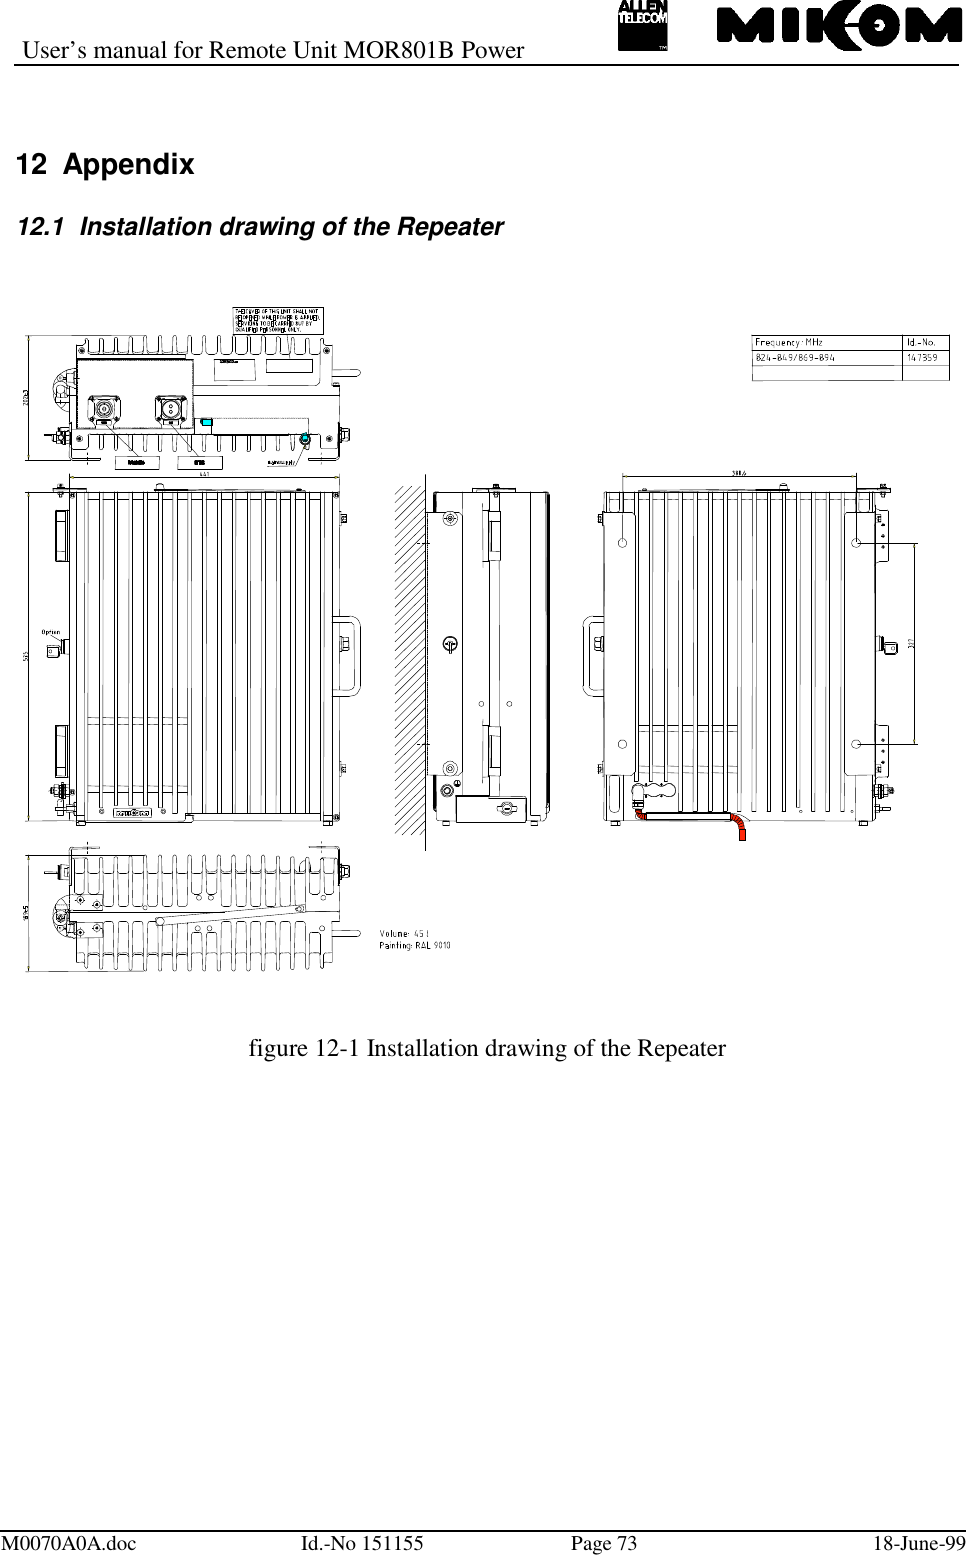 User’s manual for Remote Unit MOR801B PowerM0070A0A.doc Id.-No 151155 Page 73 18-June-9912 Appendix12.1  Installation drawing of the Repeaterfigure 12-1 Installation drawing of the Repeater